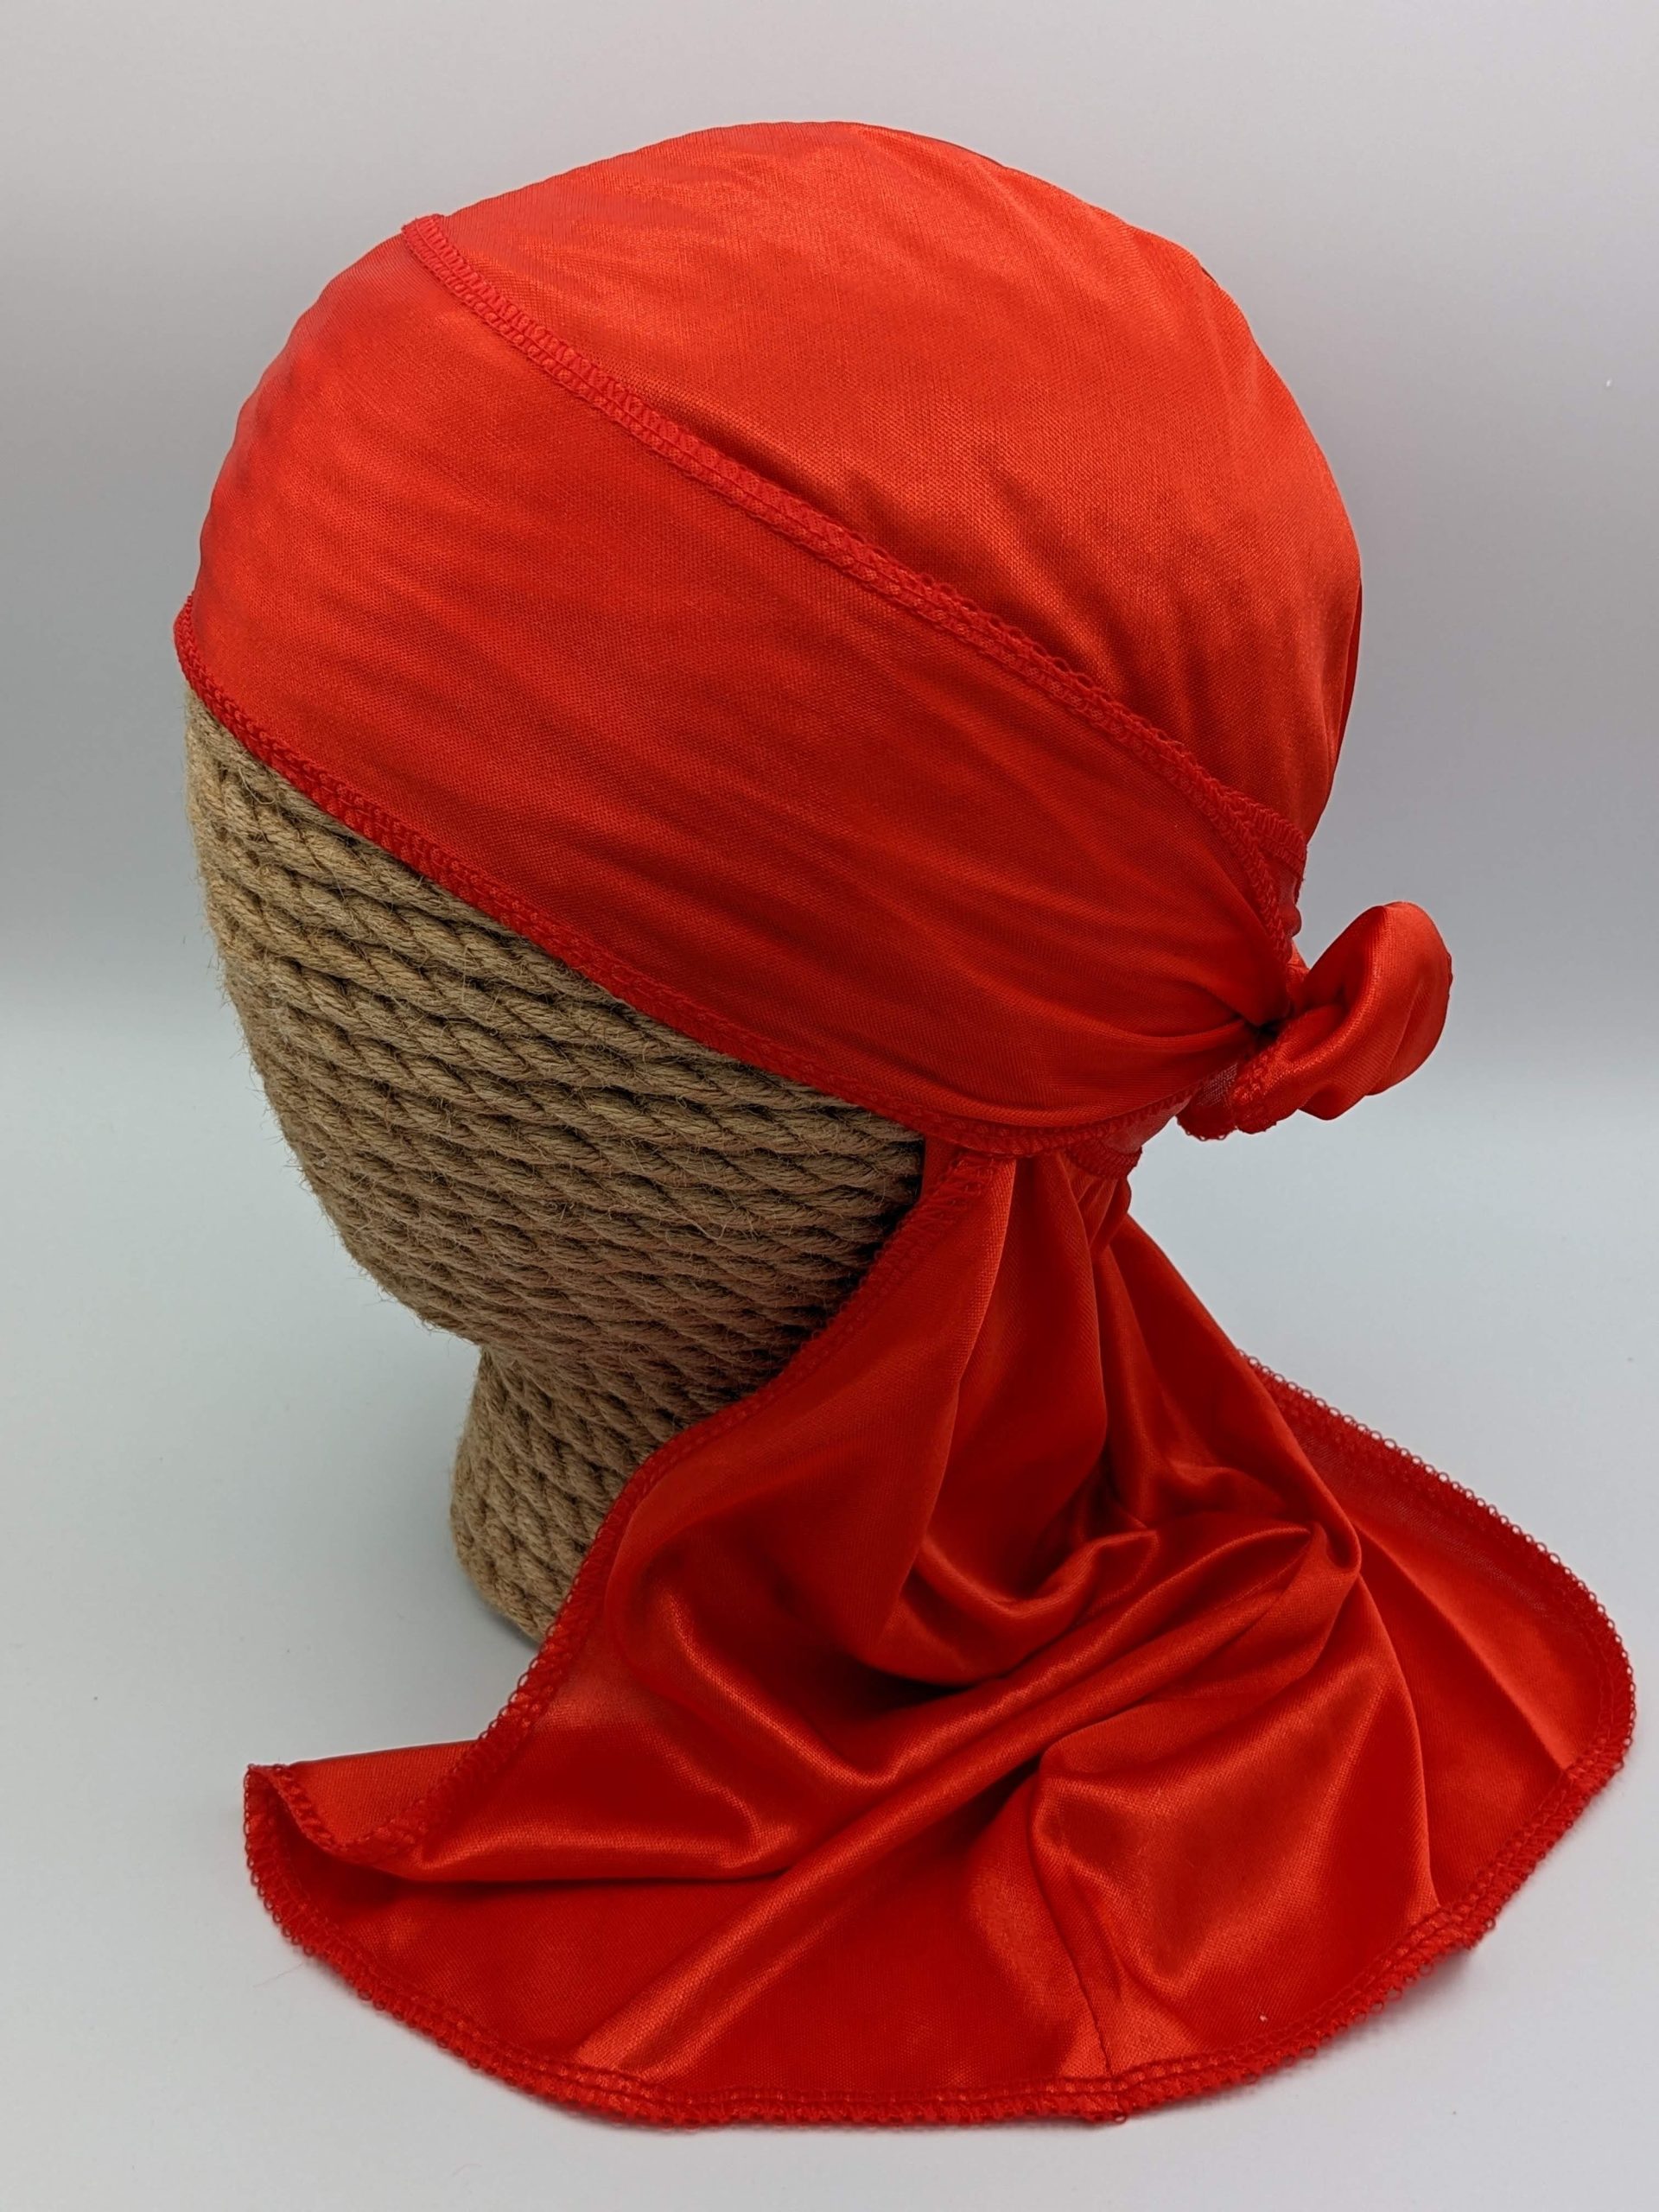 Red Silky Durag